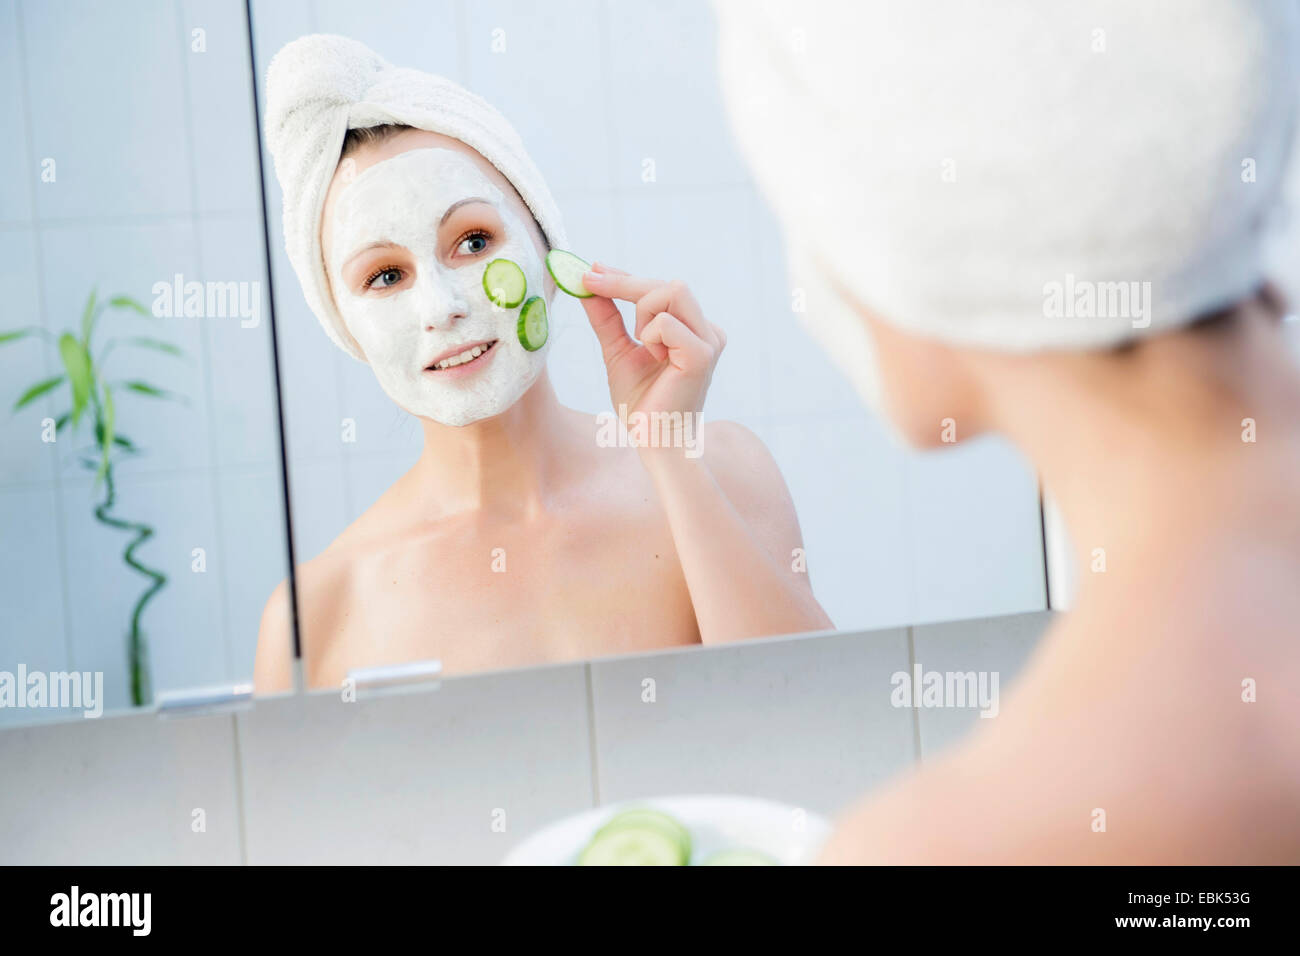 woman in bathroom with cucumber face masque Stock Photo